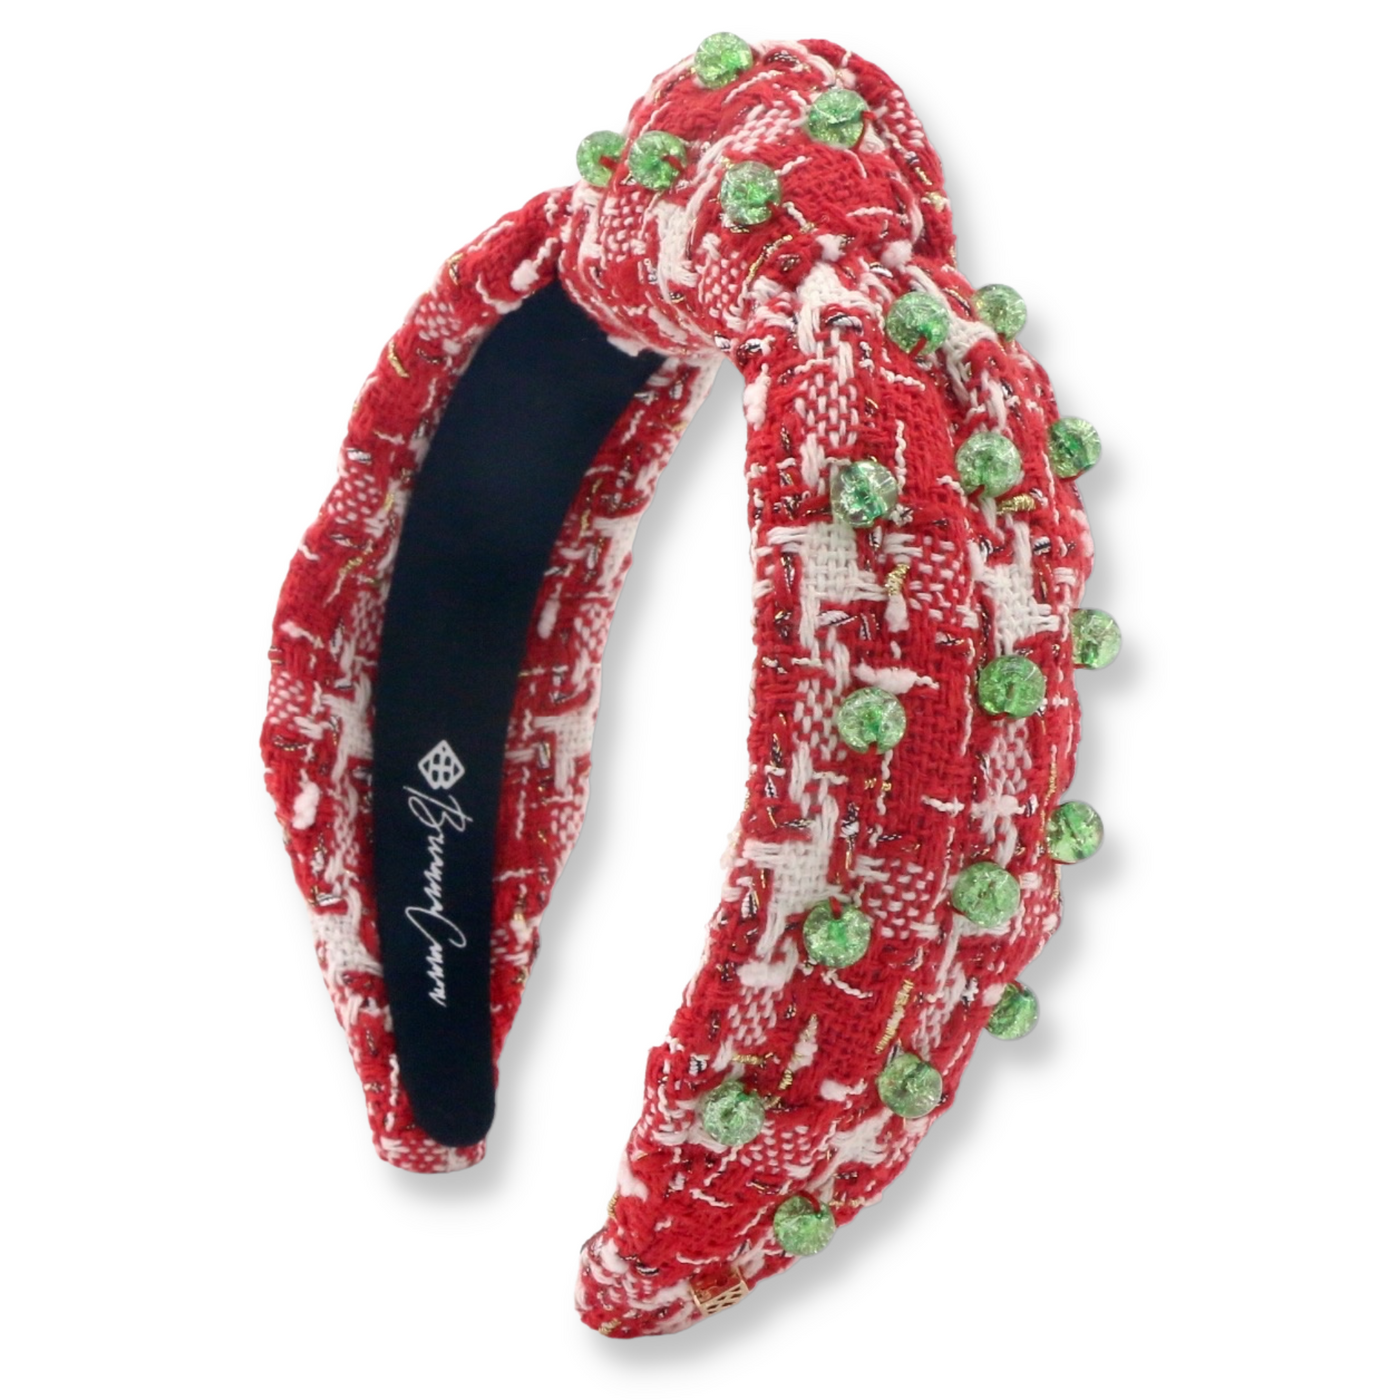 Red & White Tweed Headband with Green Glass Beads